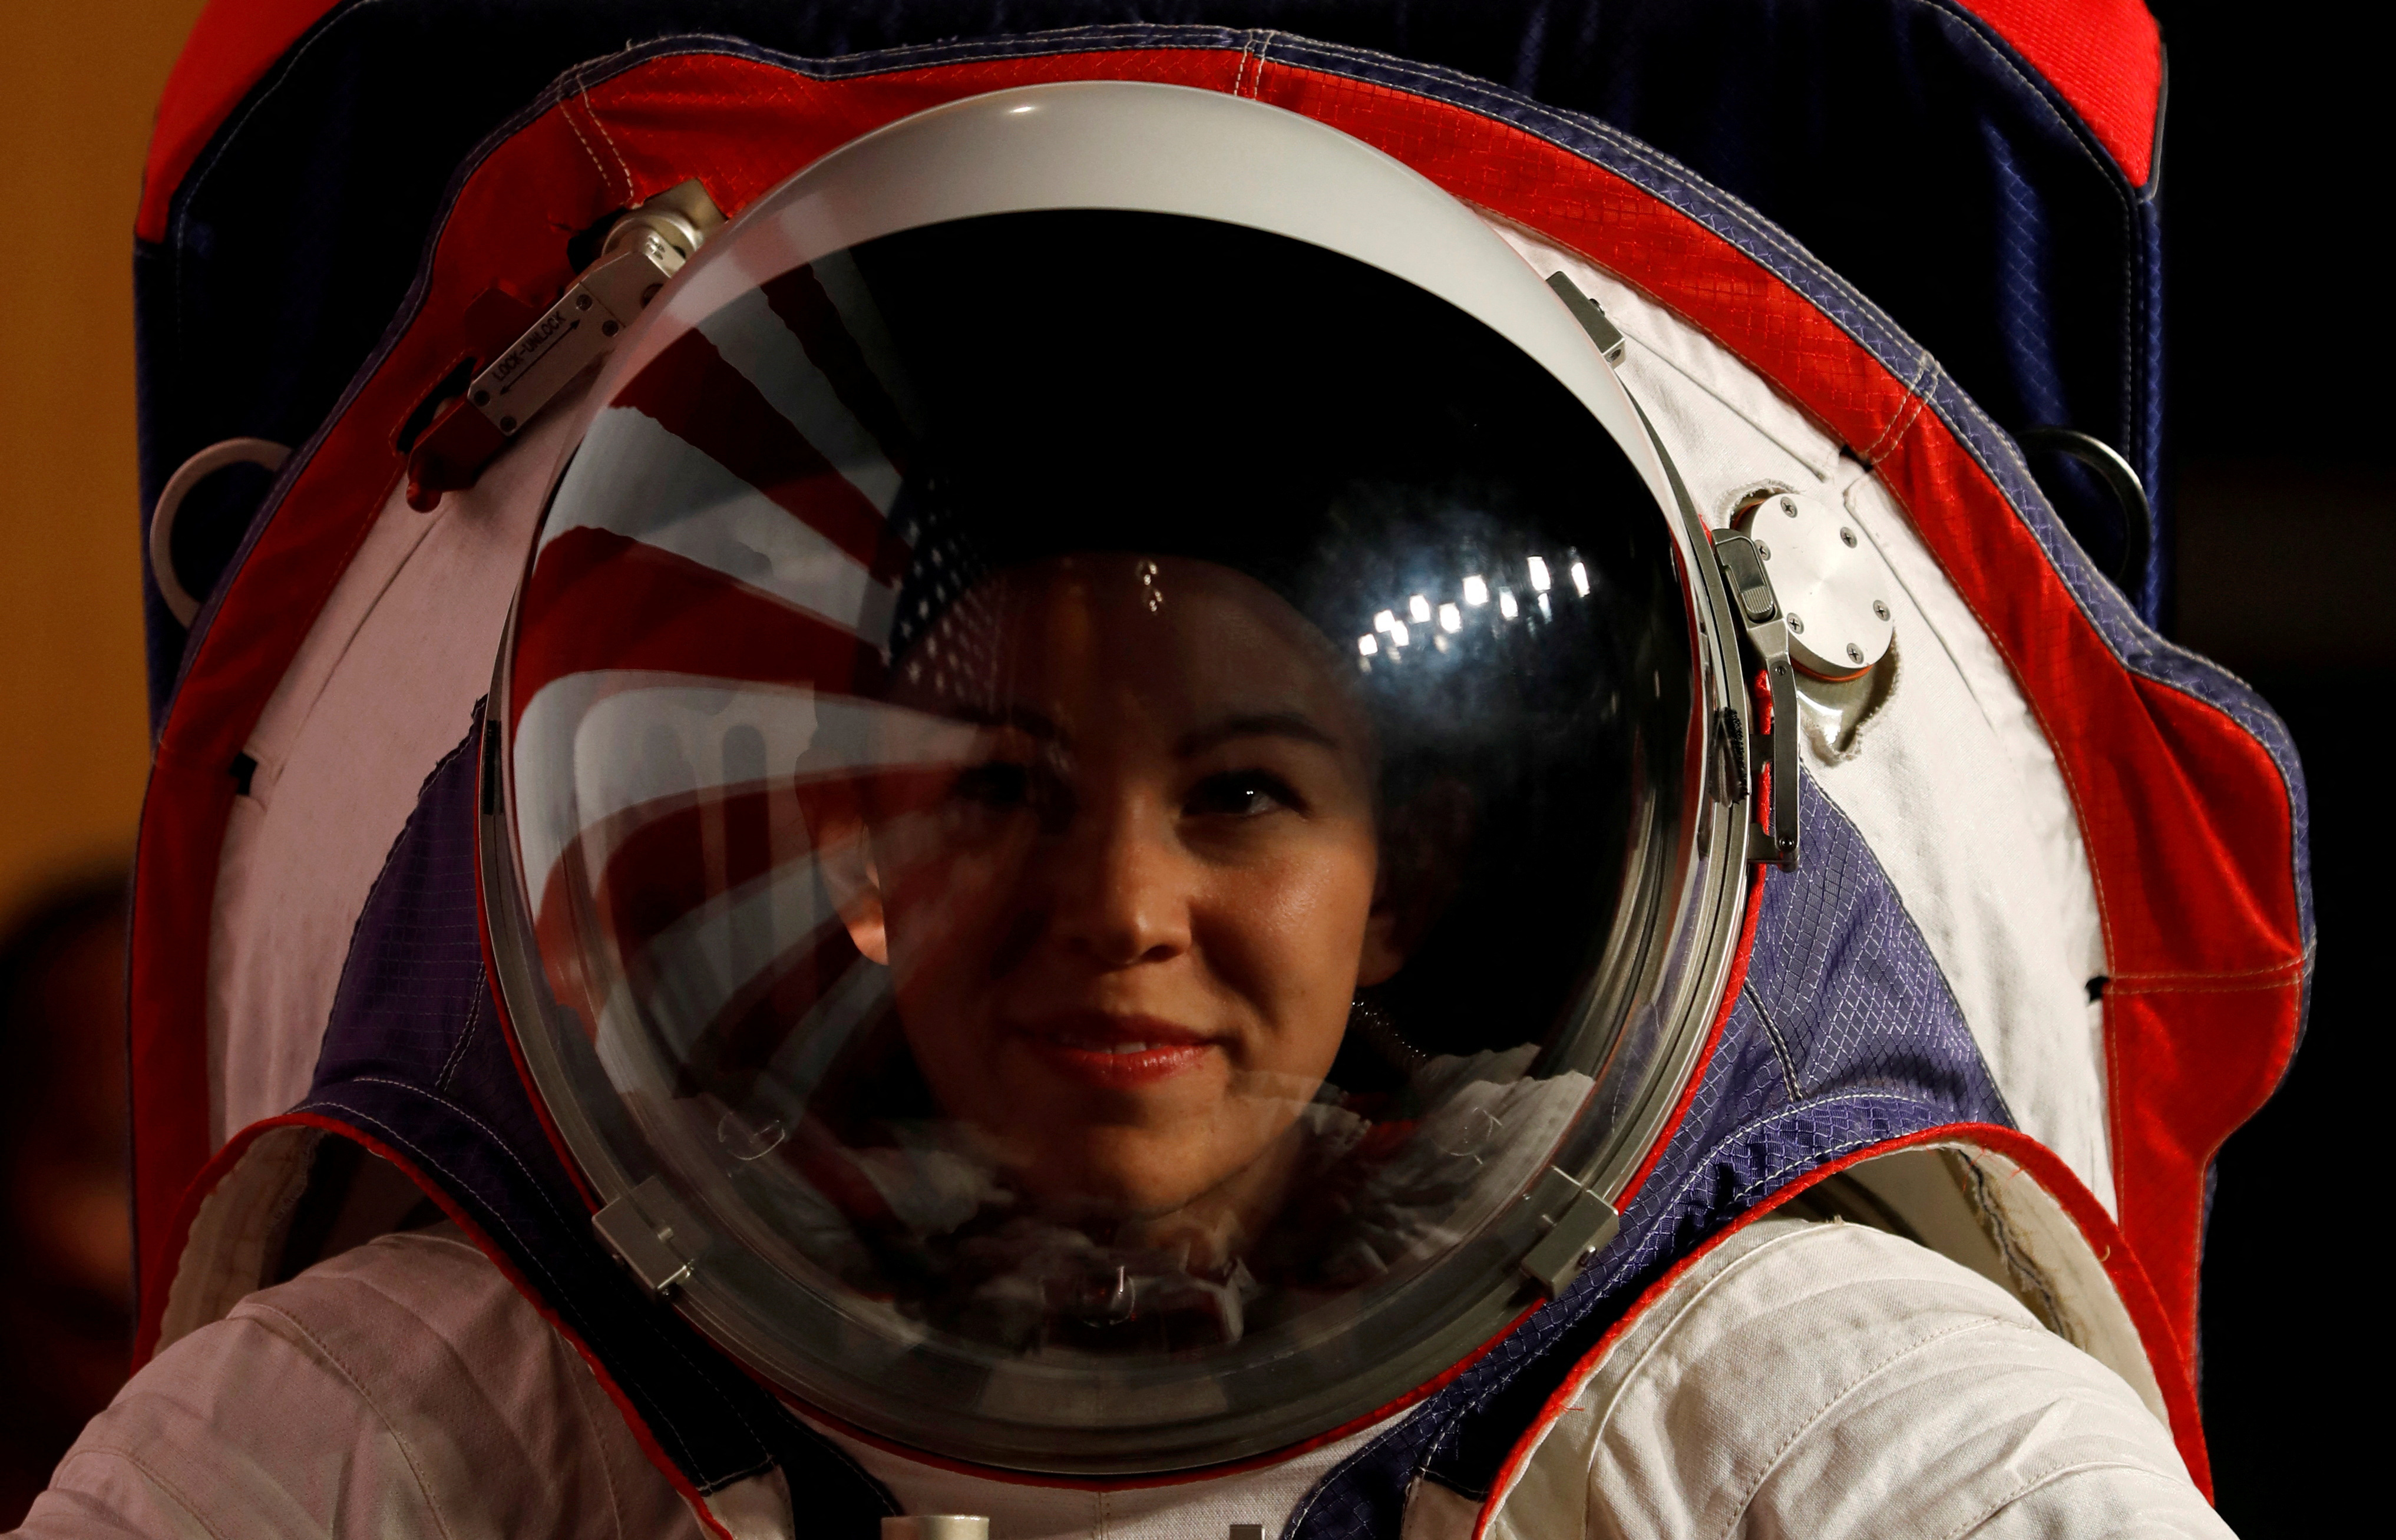 NASA unveil prototype spacesuits for astronauts to wear on the moon in Washington